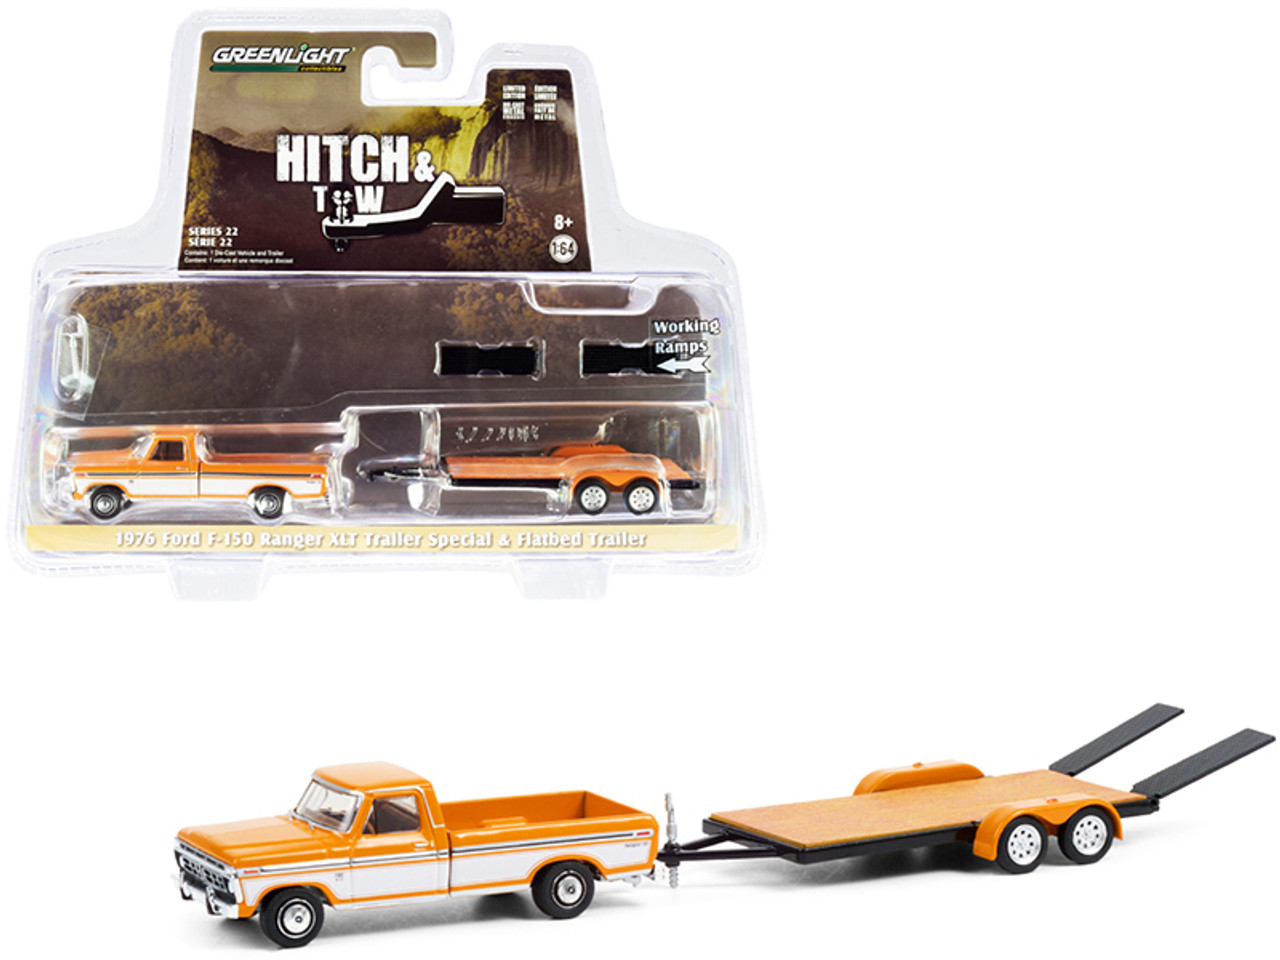 1976 Ford F-150 Ranger XLT Trailer Special Pickup Truck Orange and White with Flatbed Trailer "Hitch & Tow" Series 22 1/64 Diecast Model Car by Greenlight